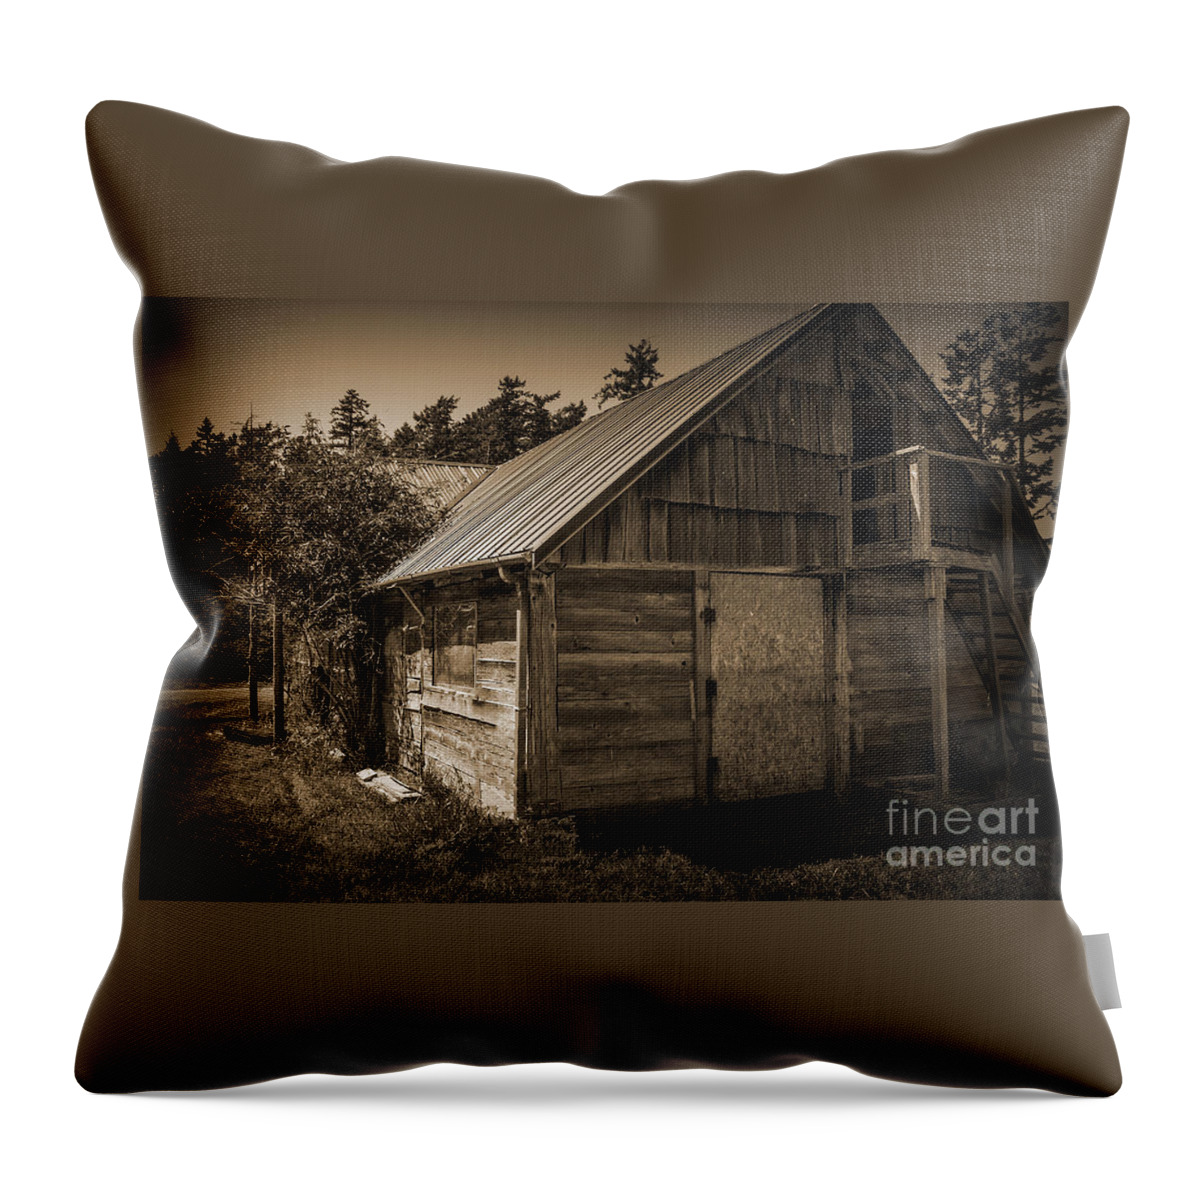 Storage-shed Throw Pillow featuring the photograph Storage Shed In Sepia by Kirt Tisdale